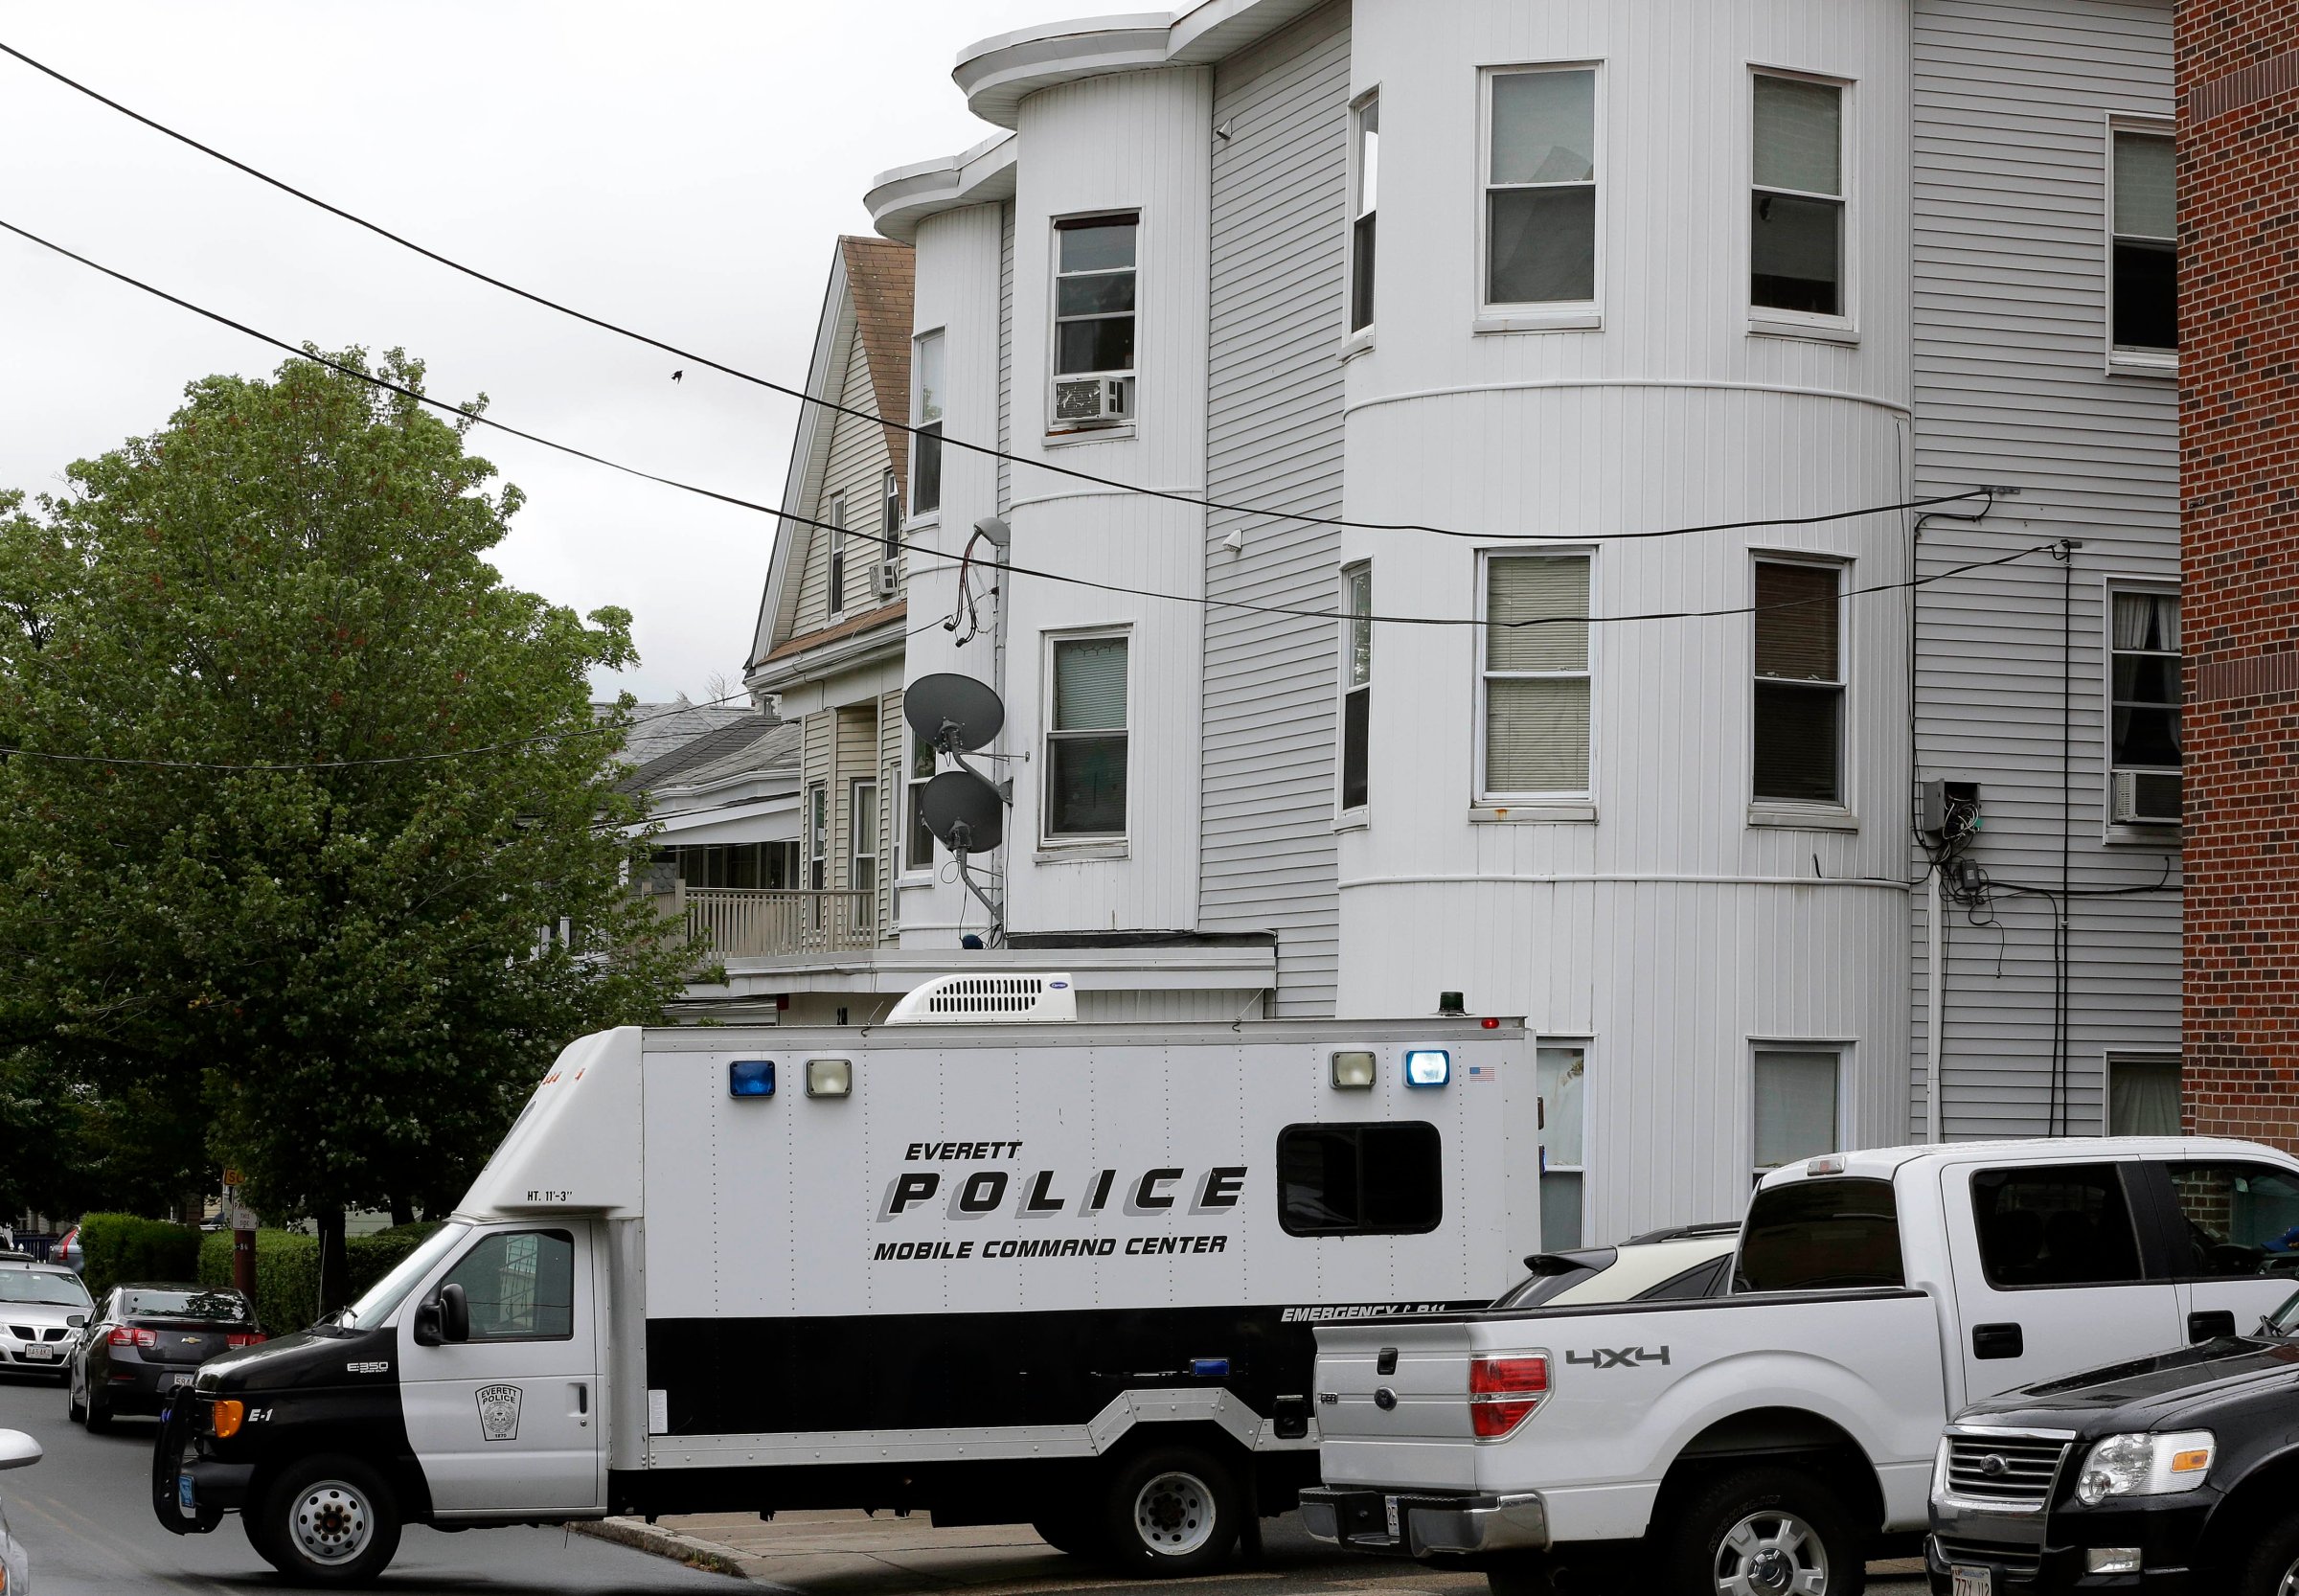 Police vehicles sit in front of a multi-storied home on June 2, 2015, in Everett, Mass., being searched by authorities in connection with a man shot and killed earlier in the day in Boston. The man, under surveillance by terrorism investigators, was killed after he lunged with a knife at a Boston police officer and an FBI agent.